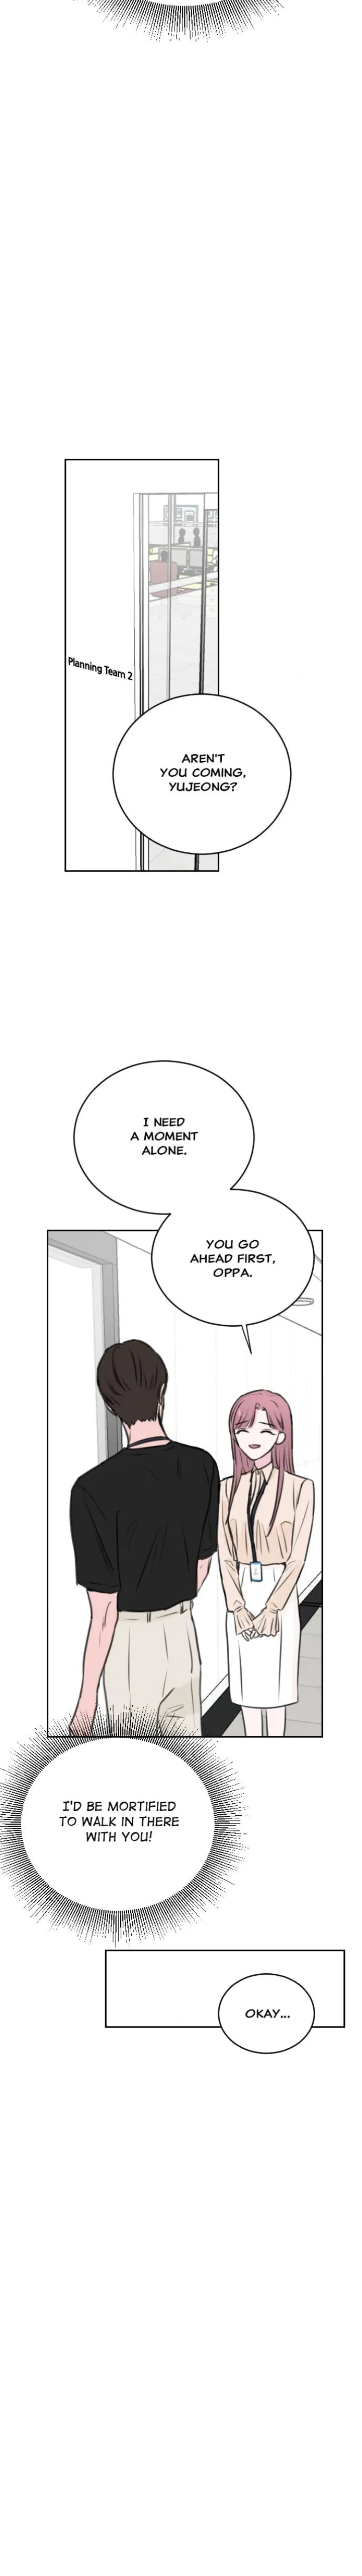 Office Marriage, After a Breakup chapter 16